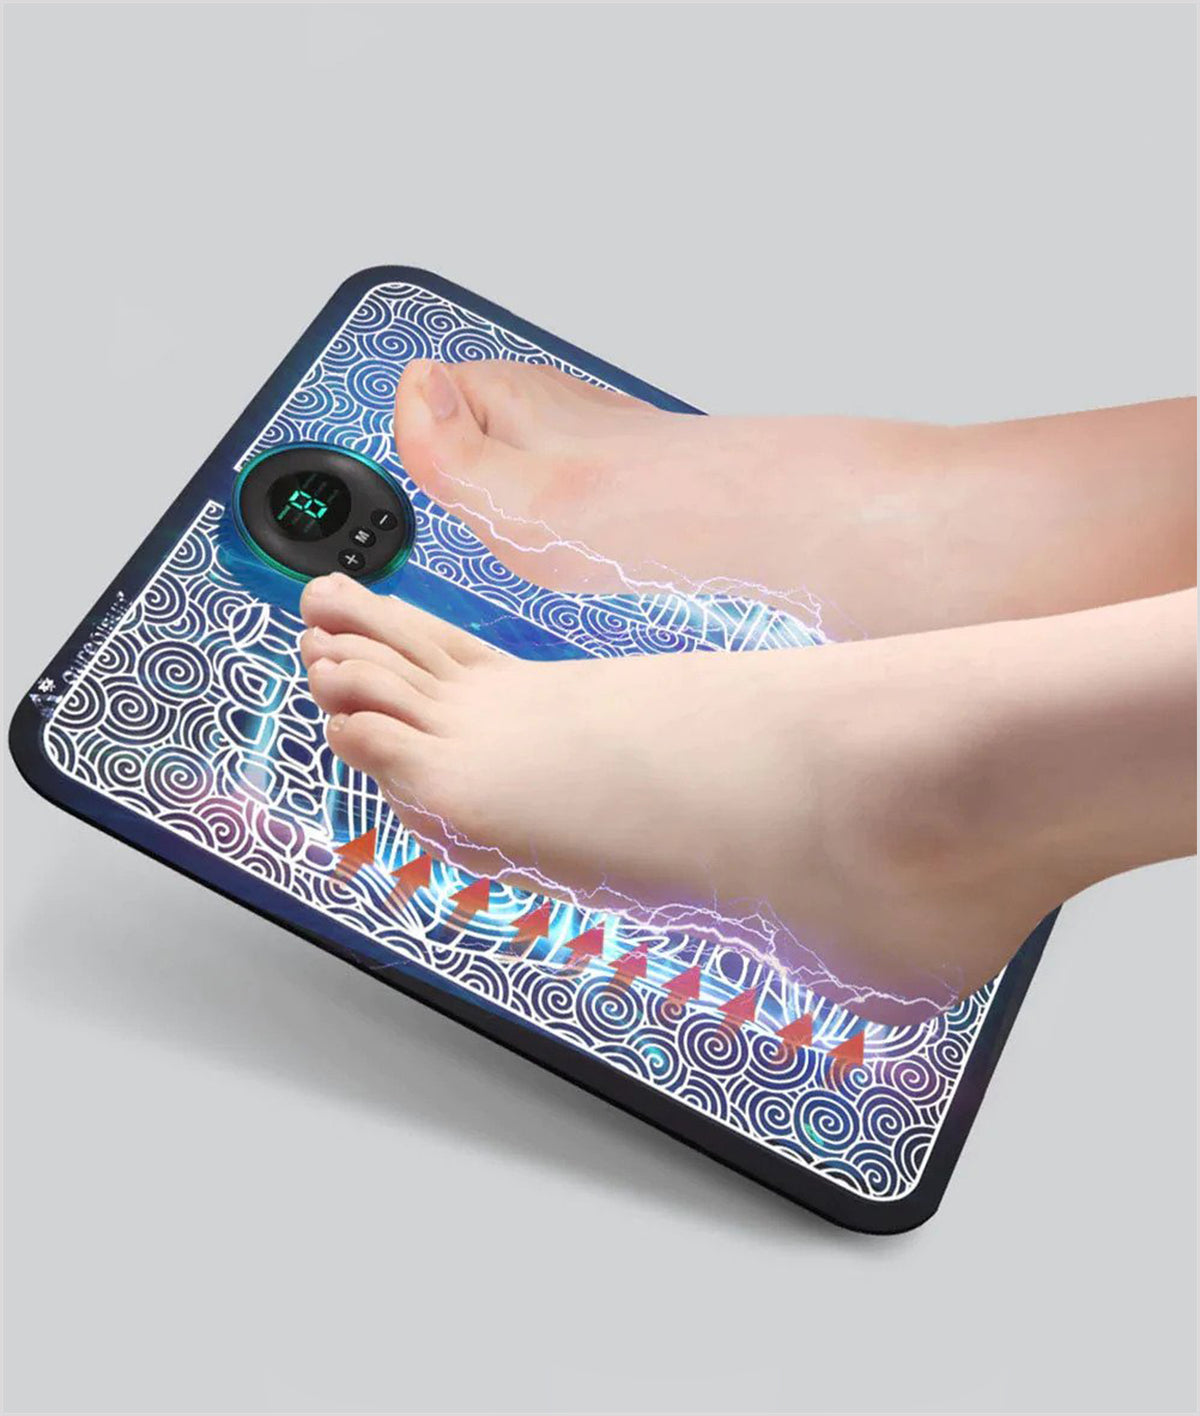 Foot Massager,ShowTop EMS USB Rechargeable Folding Portable Electric Massage Mat,Electronic Muscle Stimulatior Feet Massage Promoting Blood Circulation Muscle Pain Relief